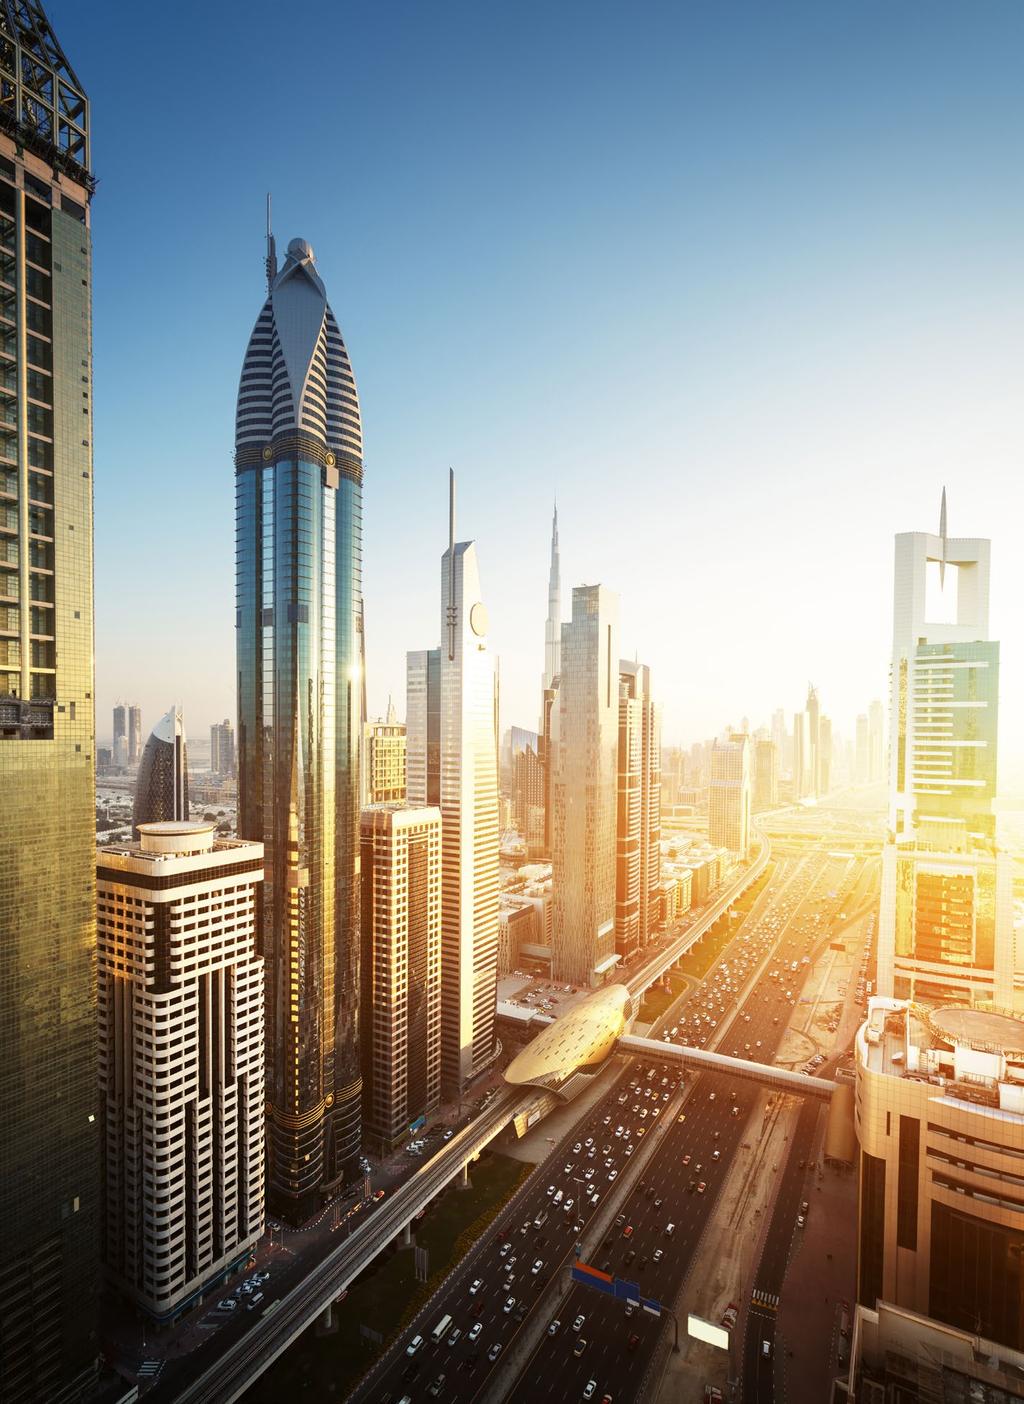 With nearly 1 million commuters coming into Dubai each day, there